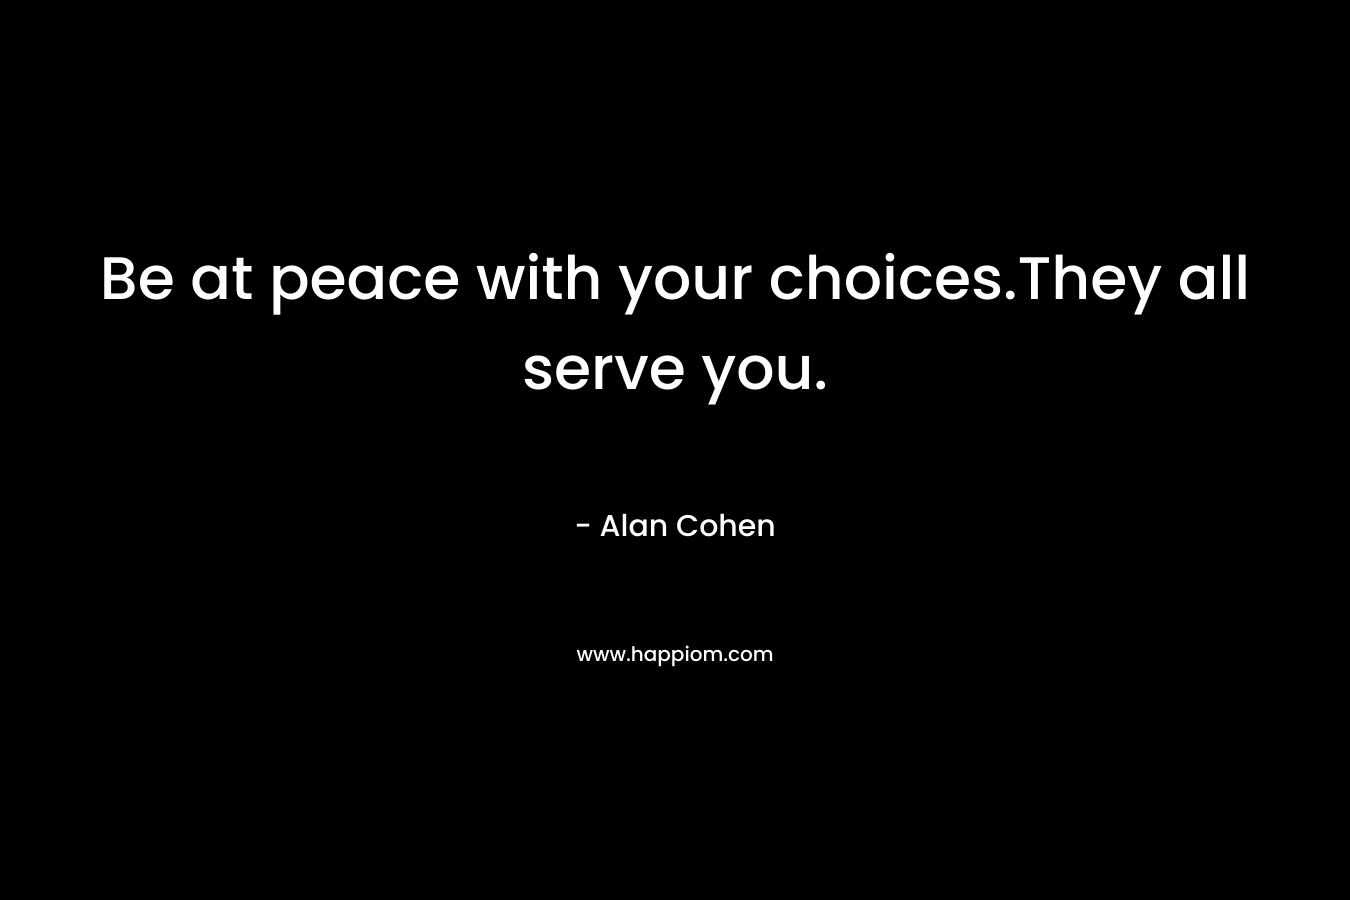 Be at peace with your choices.They all serve you.